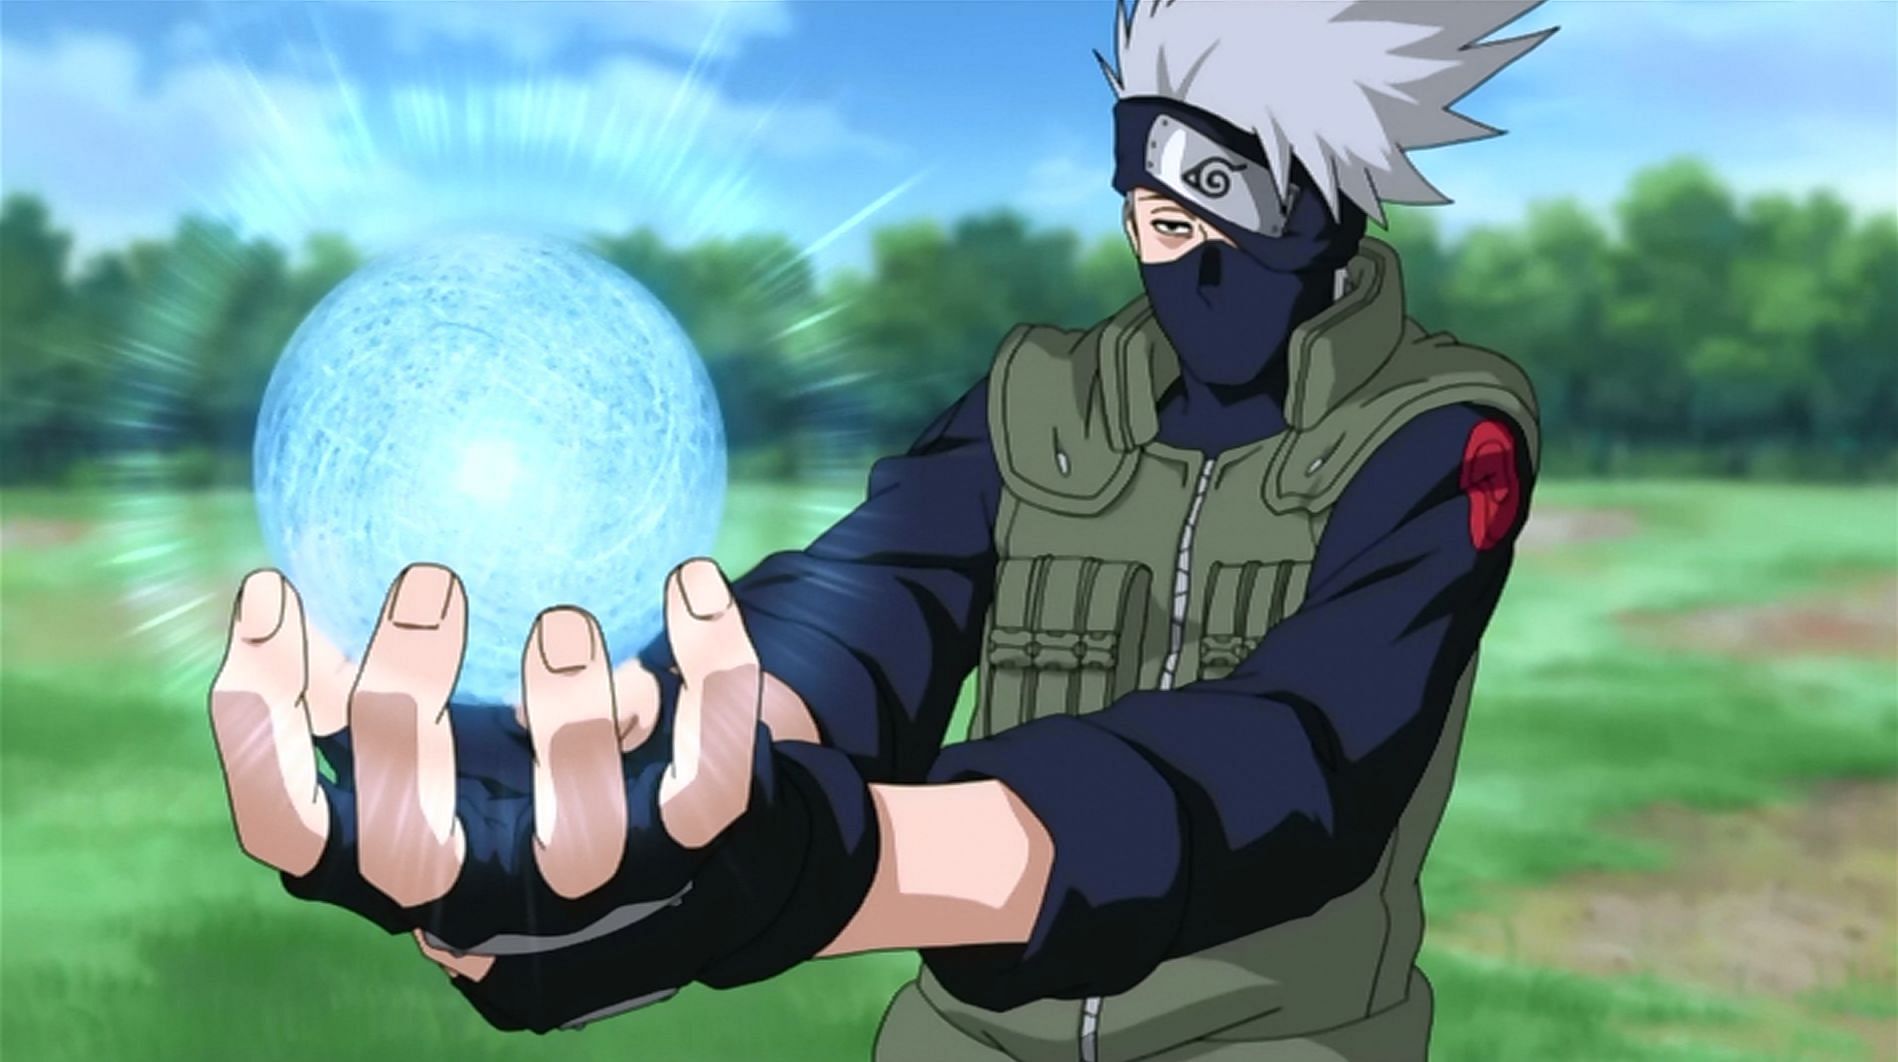 Kakashi To Get His Own Story In Naruto This Year